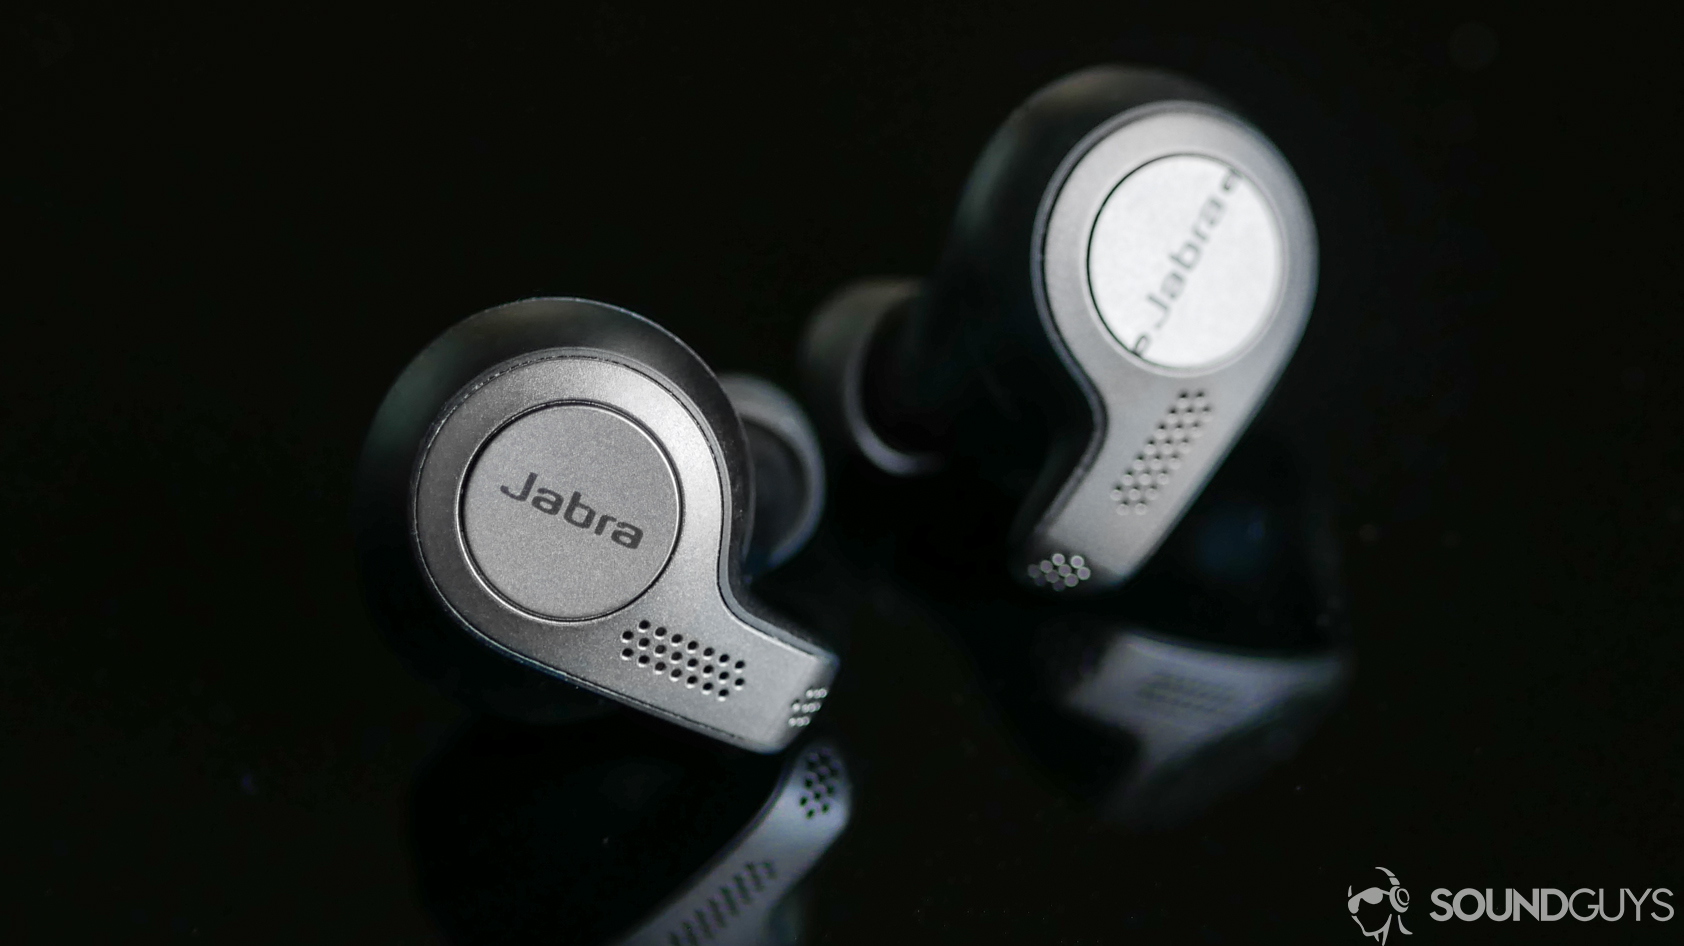 A photo of the Jabra Elite 65t true wireless earbuds on black reflective surface.